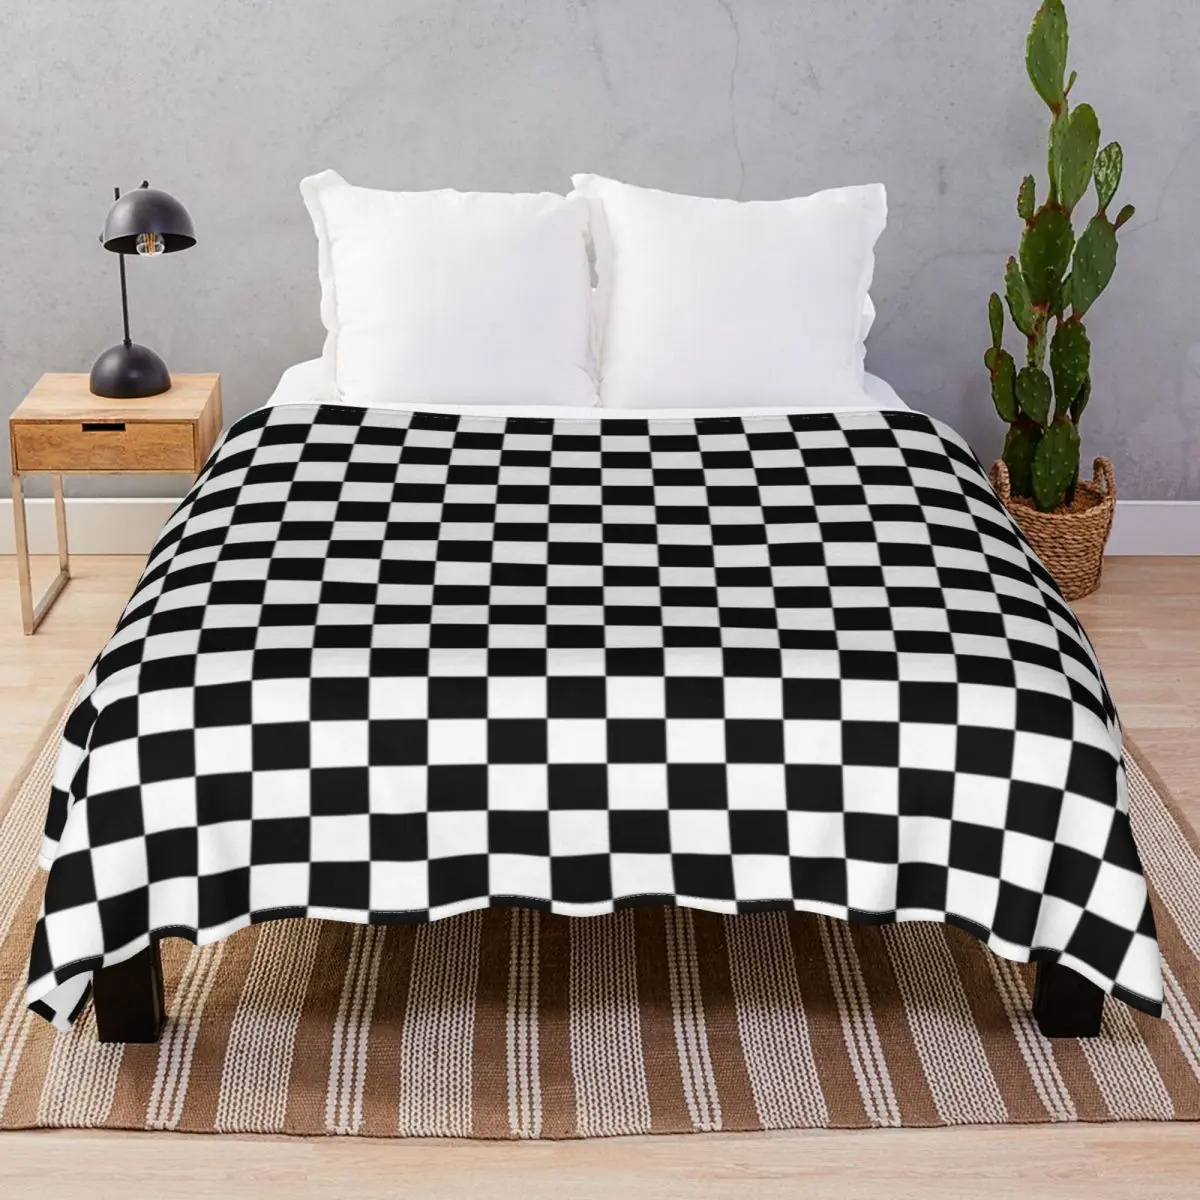 Checkered Flag Blanket Fleece Plush Decoration Ultra-Soft Throw Blankets for Bed Home Couch Travel Office